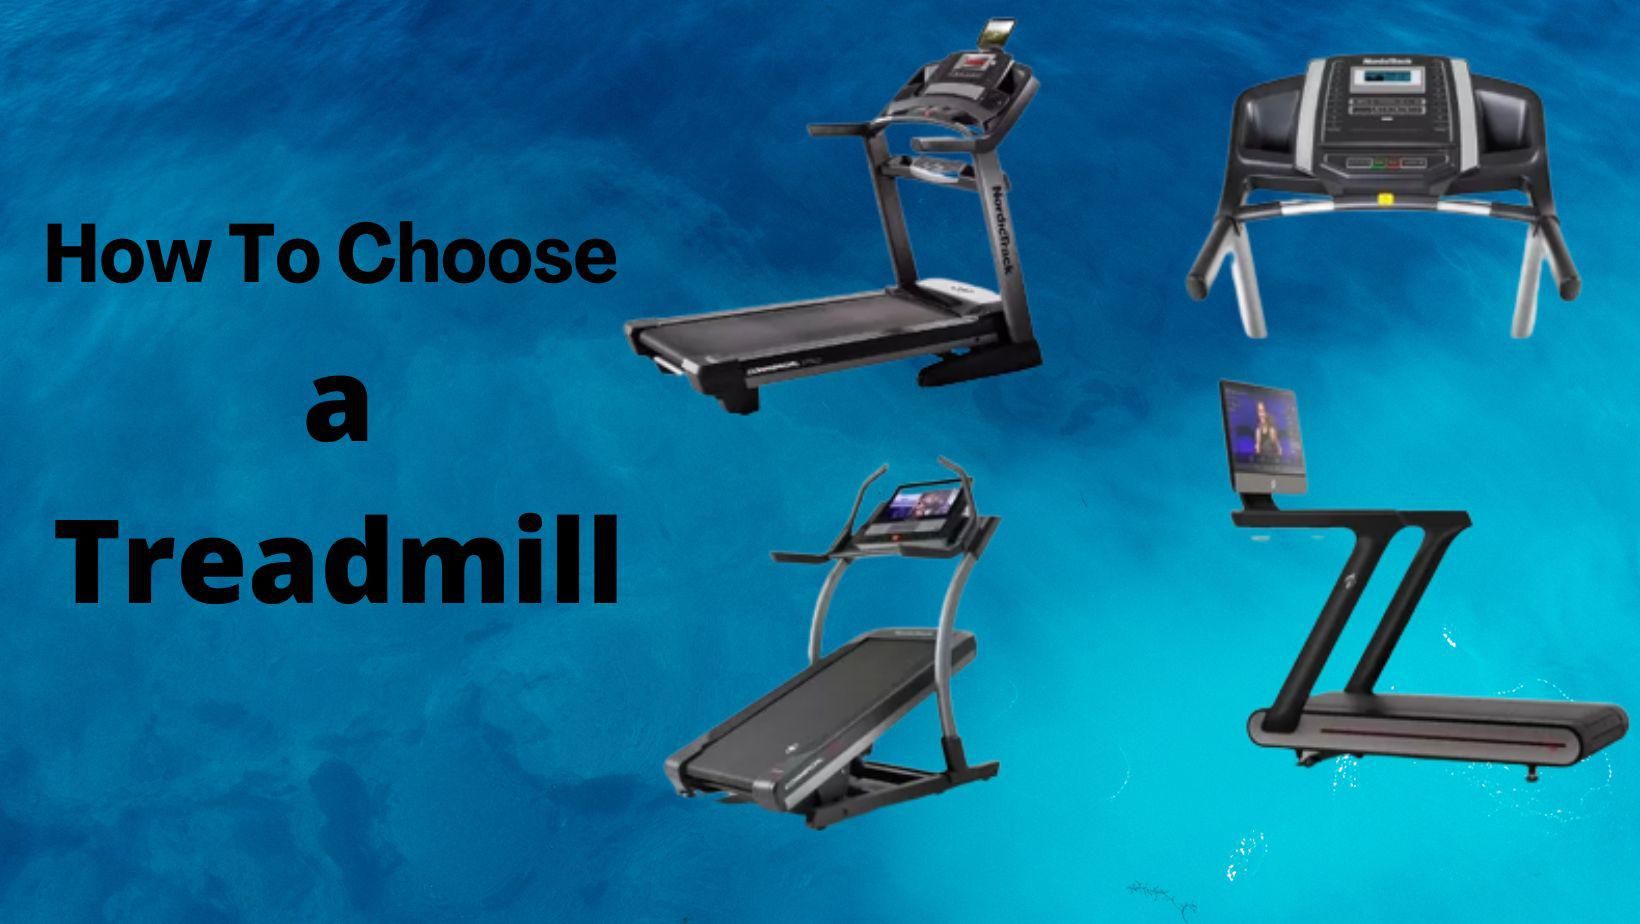 How To Choose a Treadmill